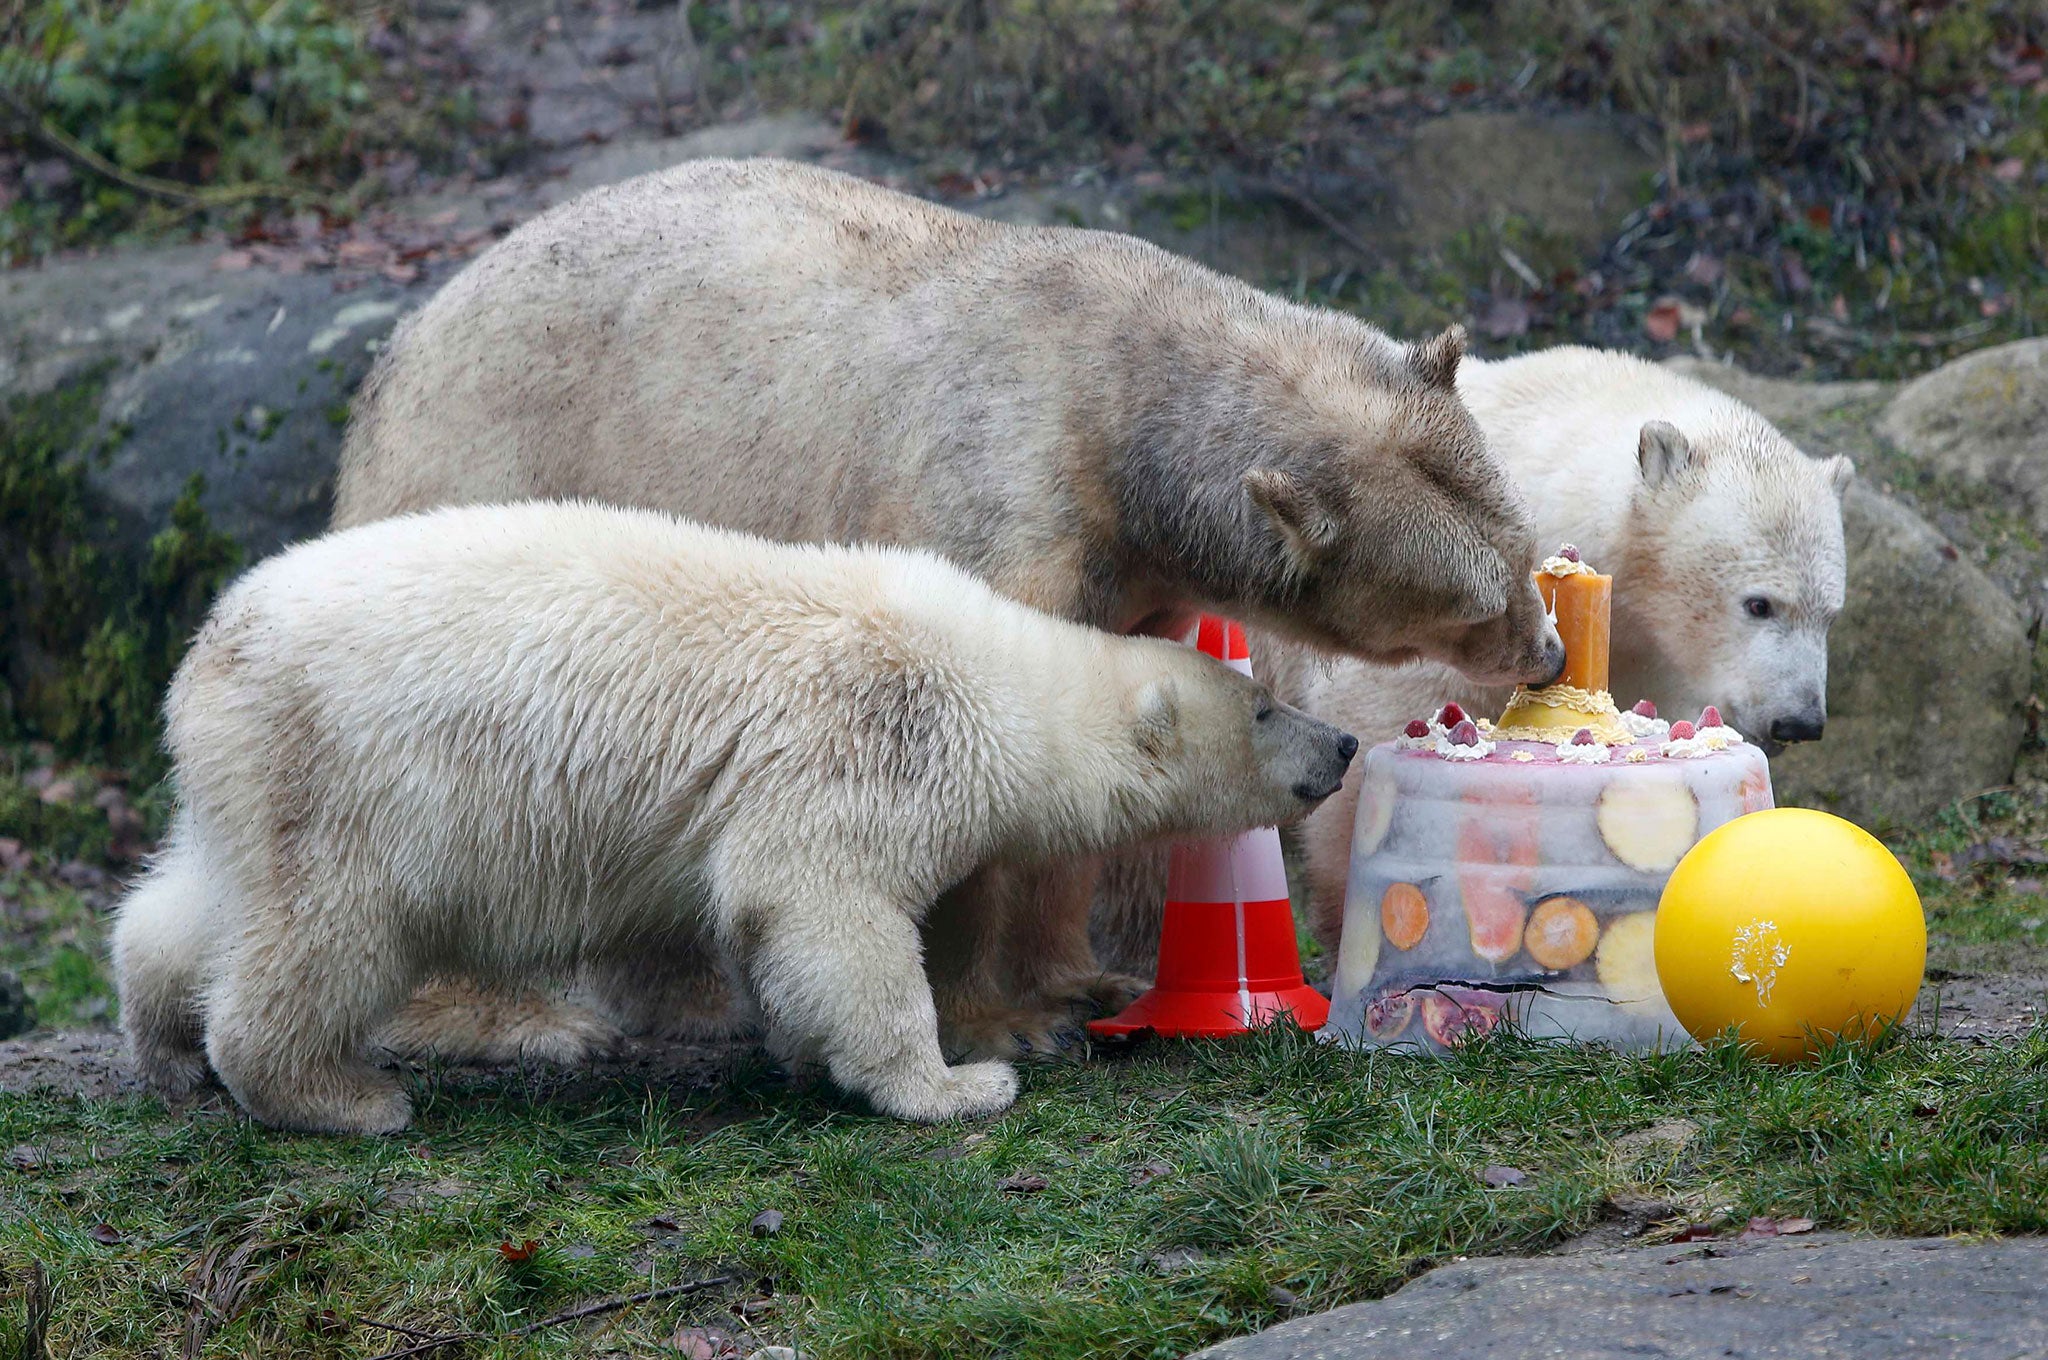 Polar bear Giovanna and her twin polar bears Nela and Nobby eat an ice cake with fresh fruit and cream to celebrate the cub's first birthday